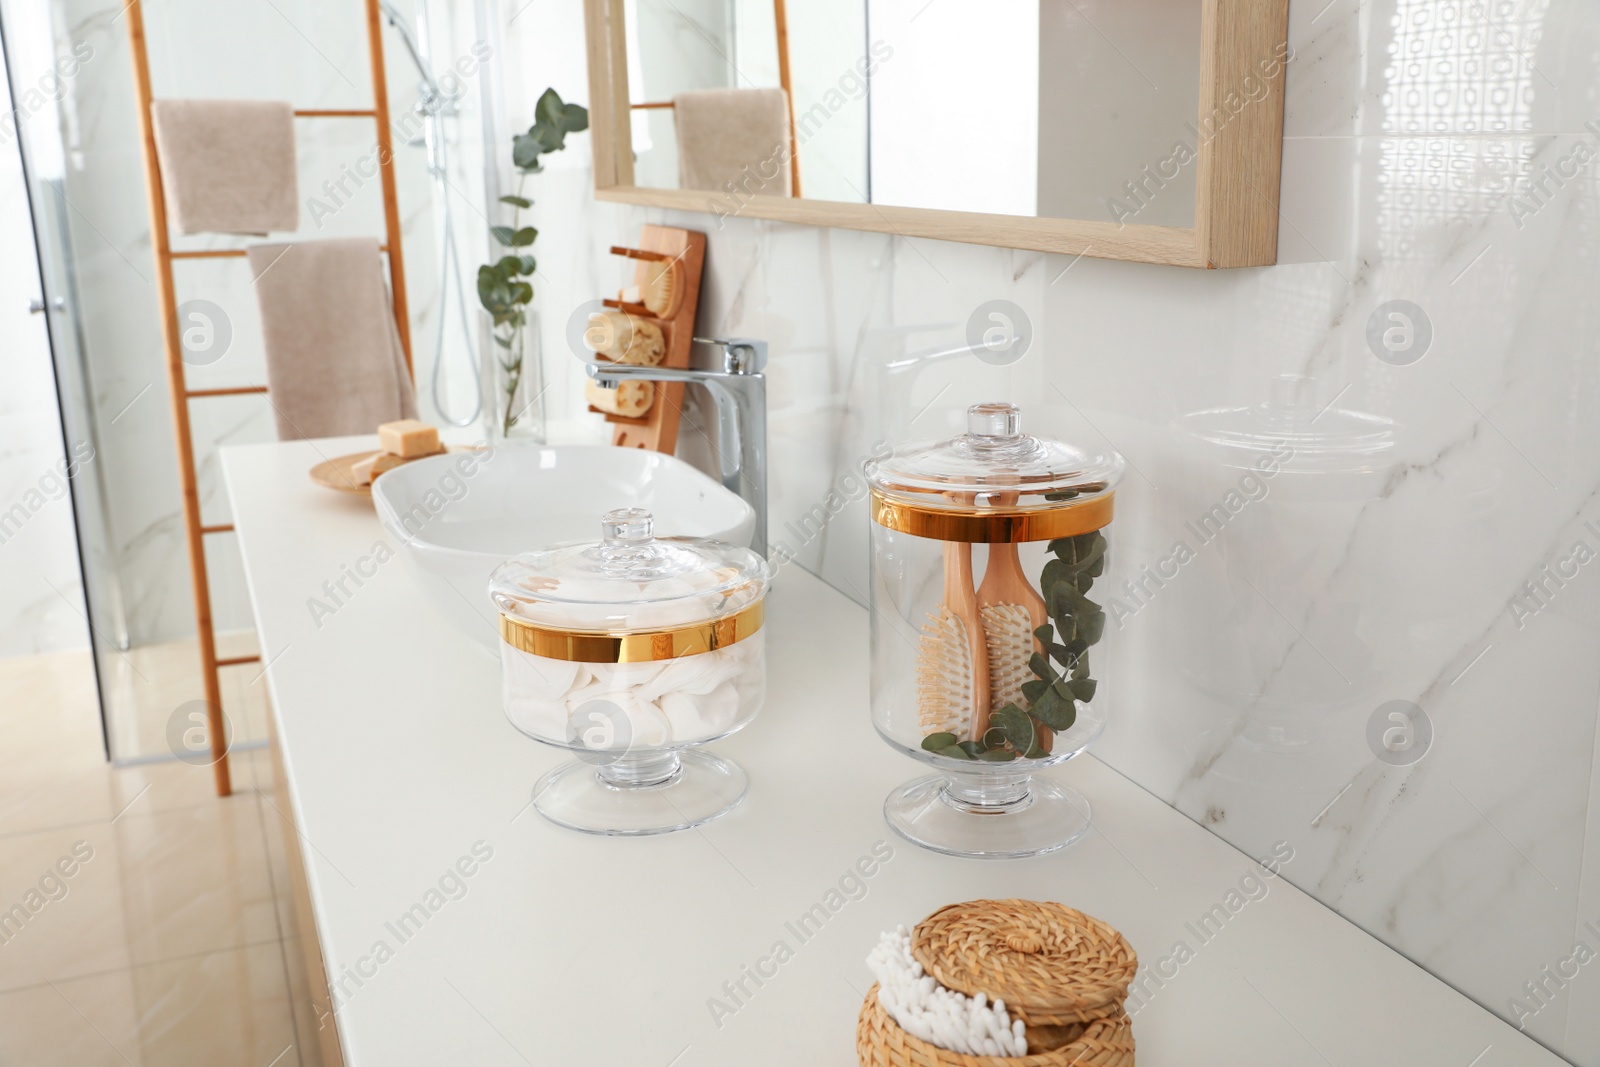 Photo of Jars with cotton pads and hairbrushes on bathroom countertop